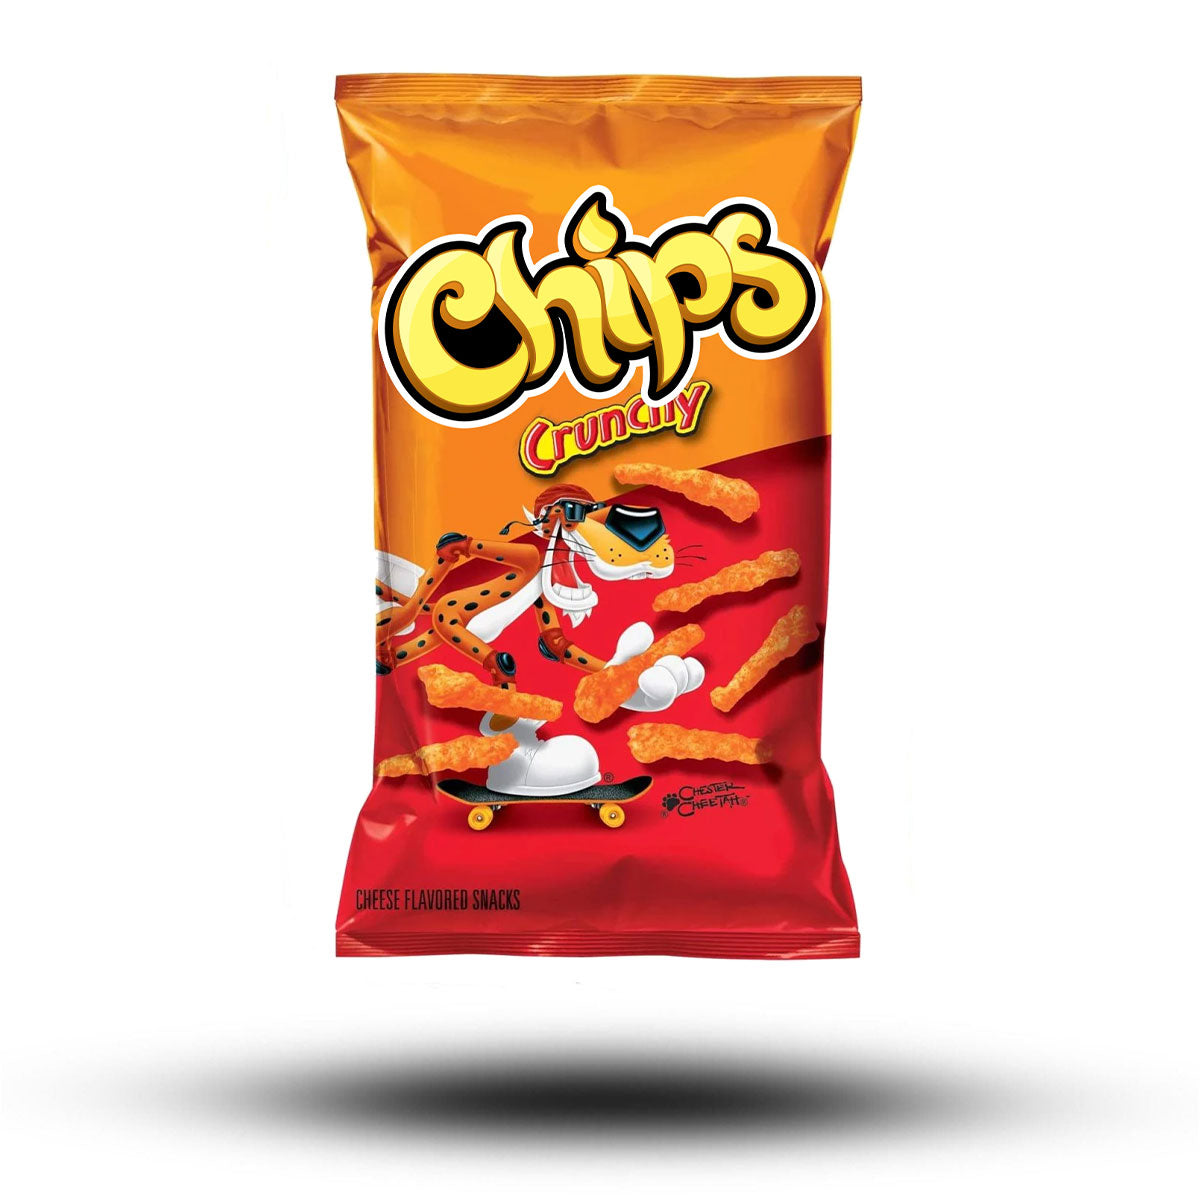 Chips Crunchy Cheese 226g